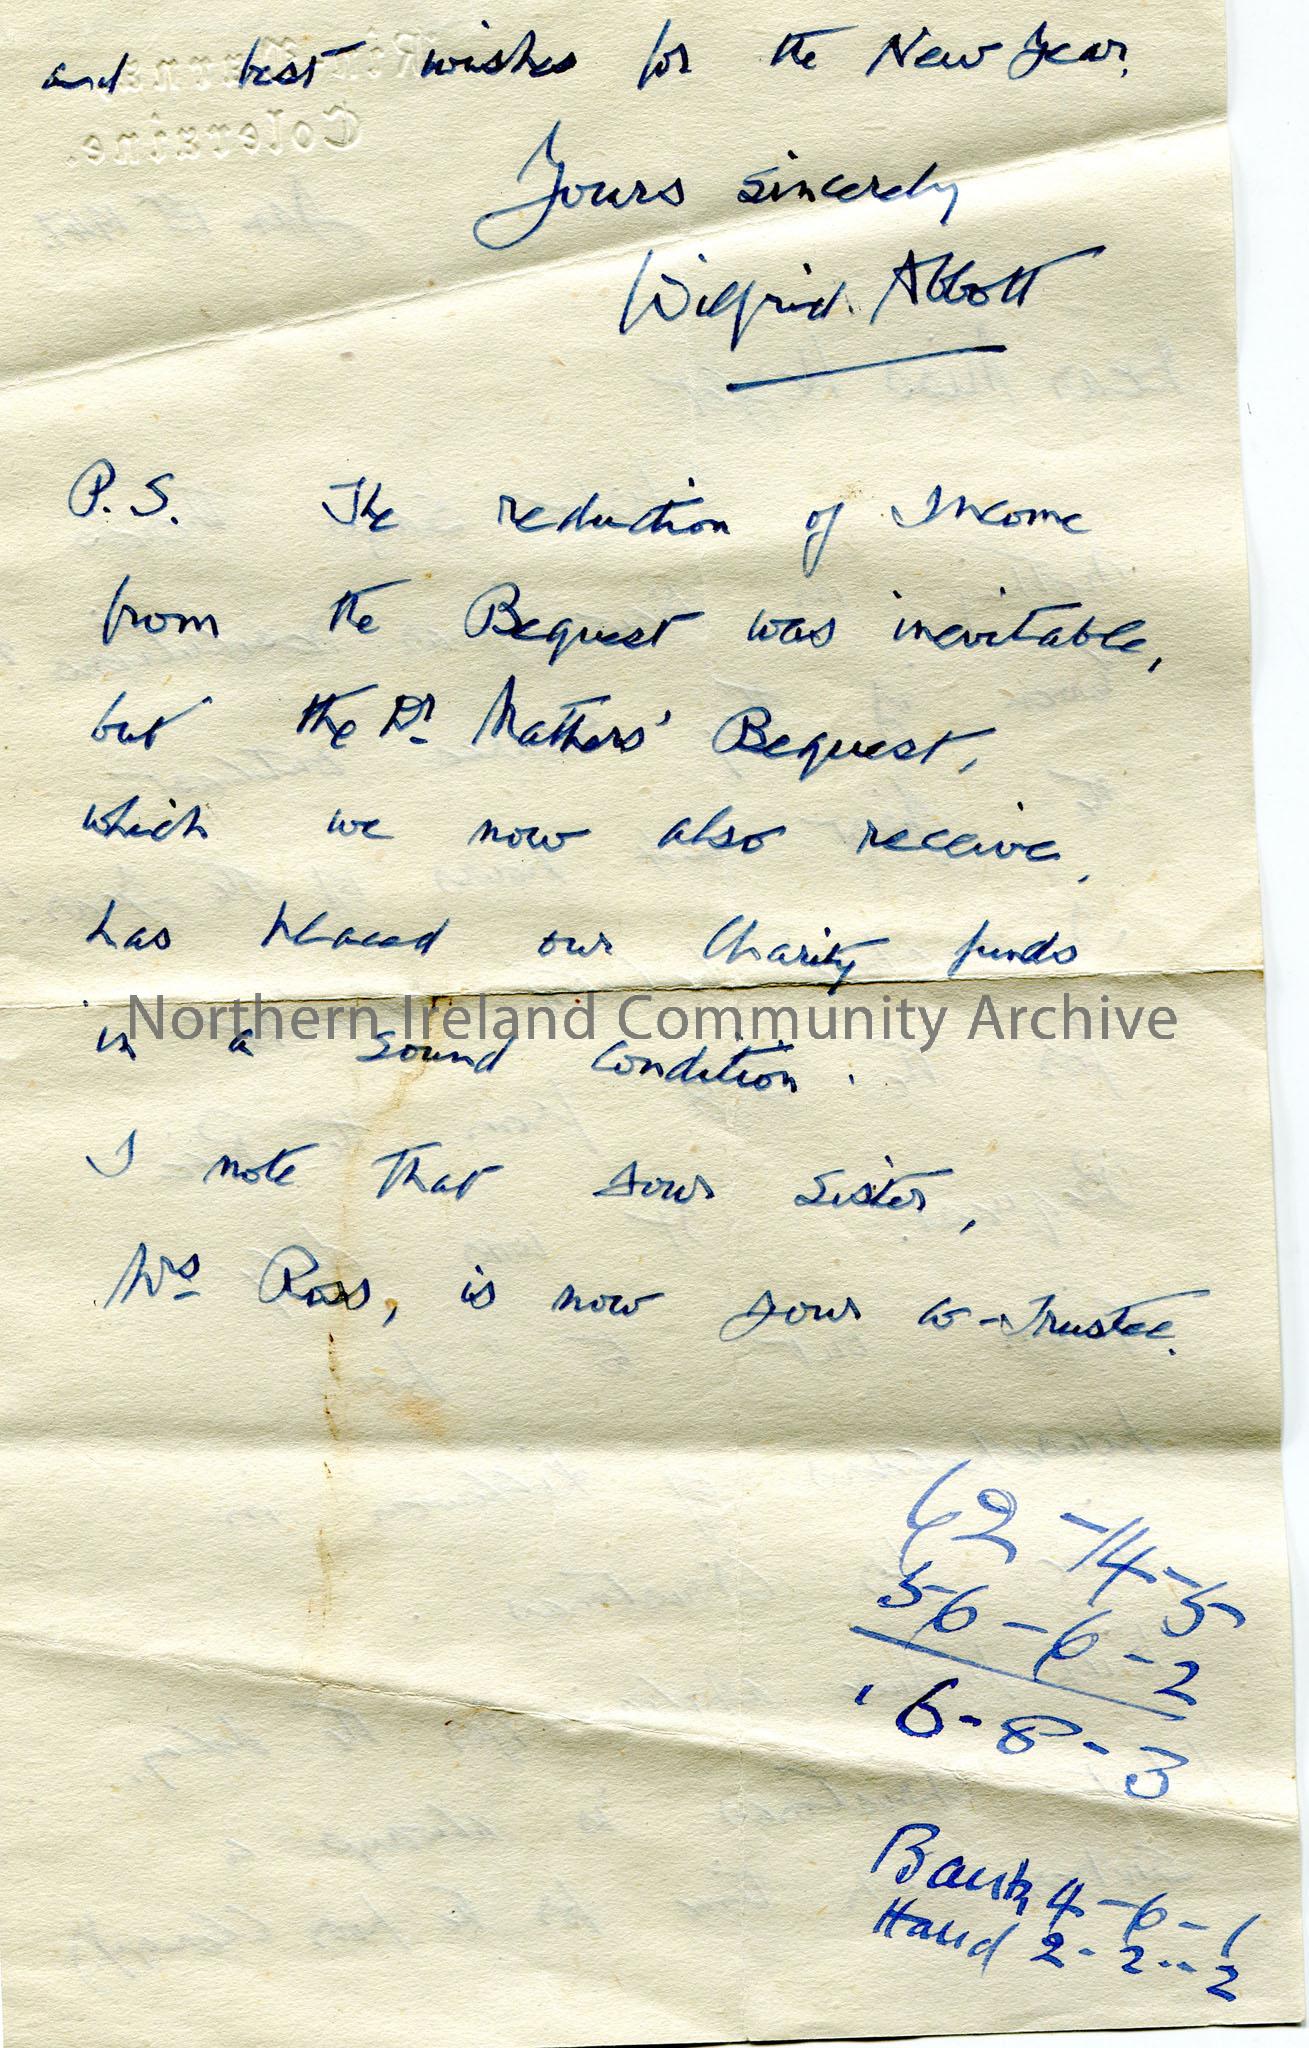 Handwritten letter, double sided, to Miss Hezlet. Refers to New Years resolutions. Encloses receipt for £8 from the Rice Bequest to the Church to… – scan335b